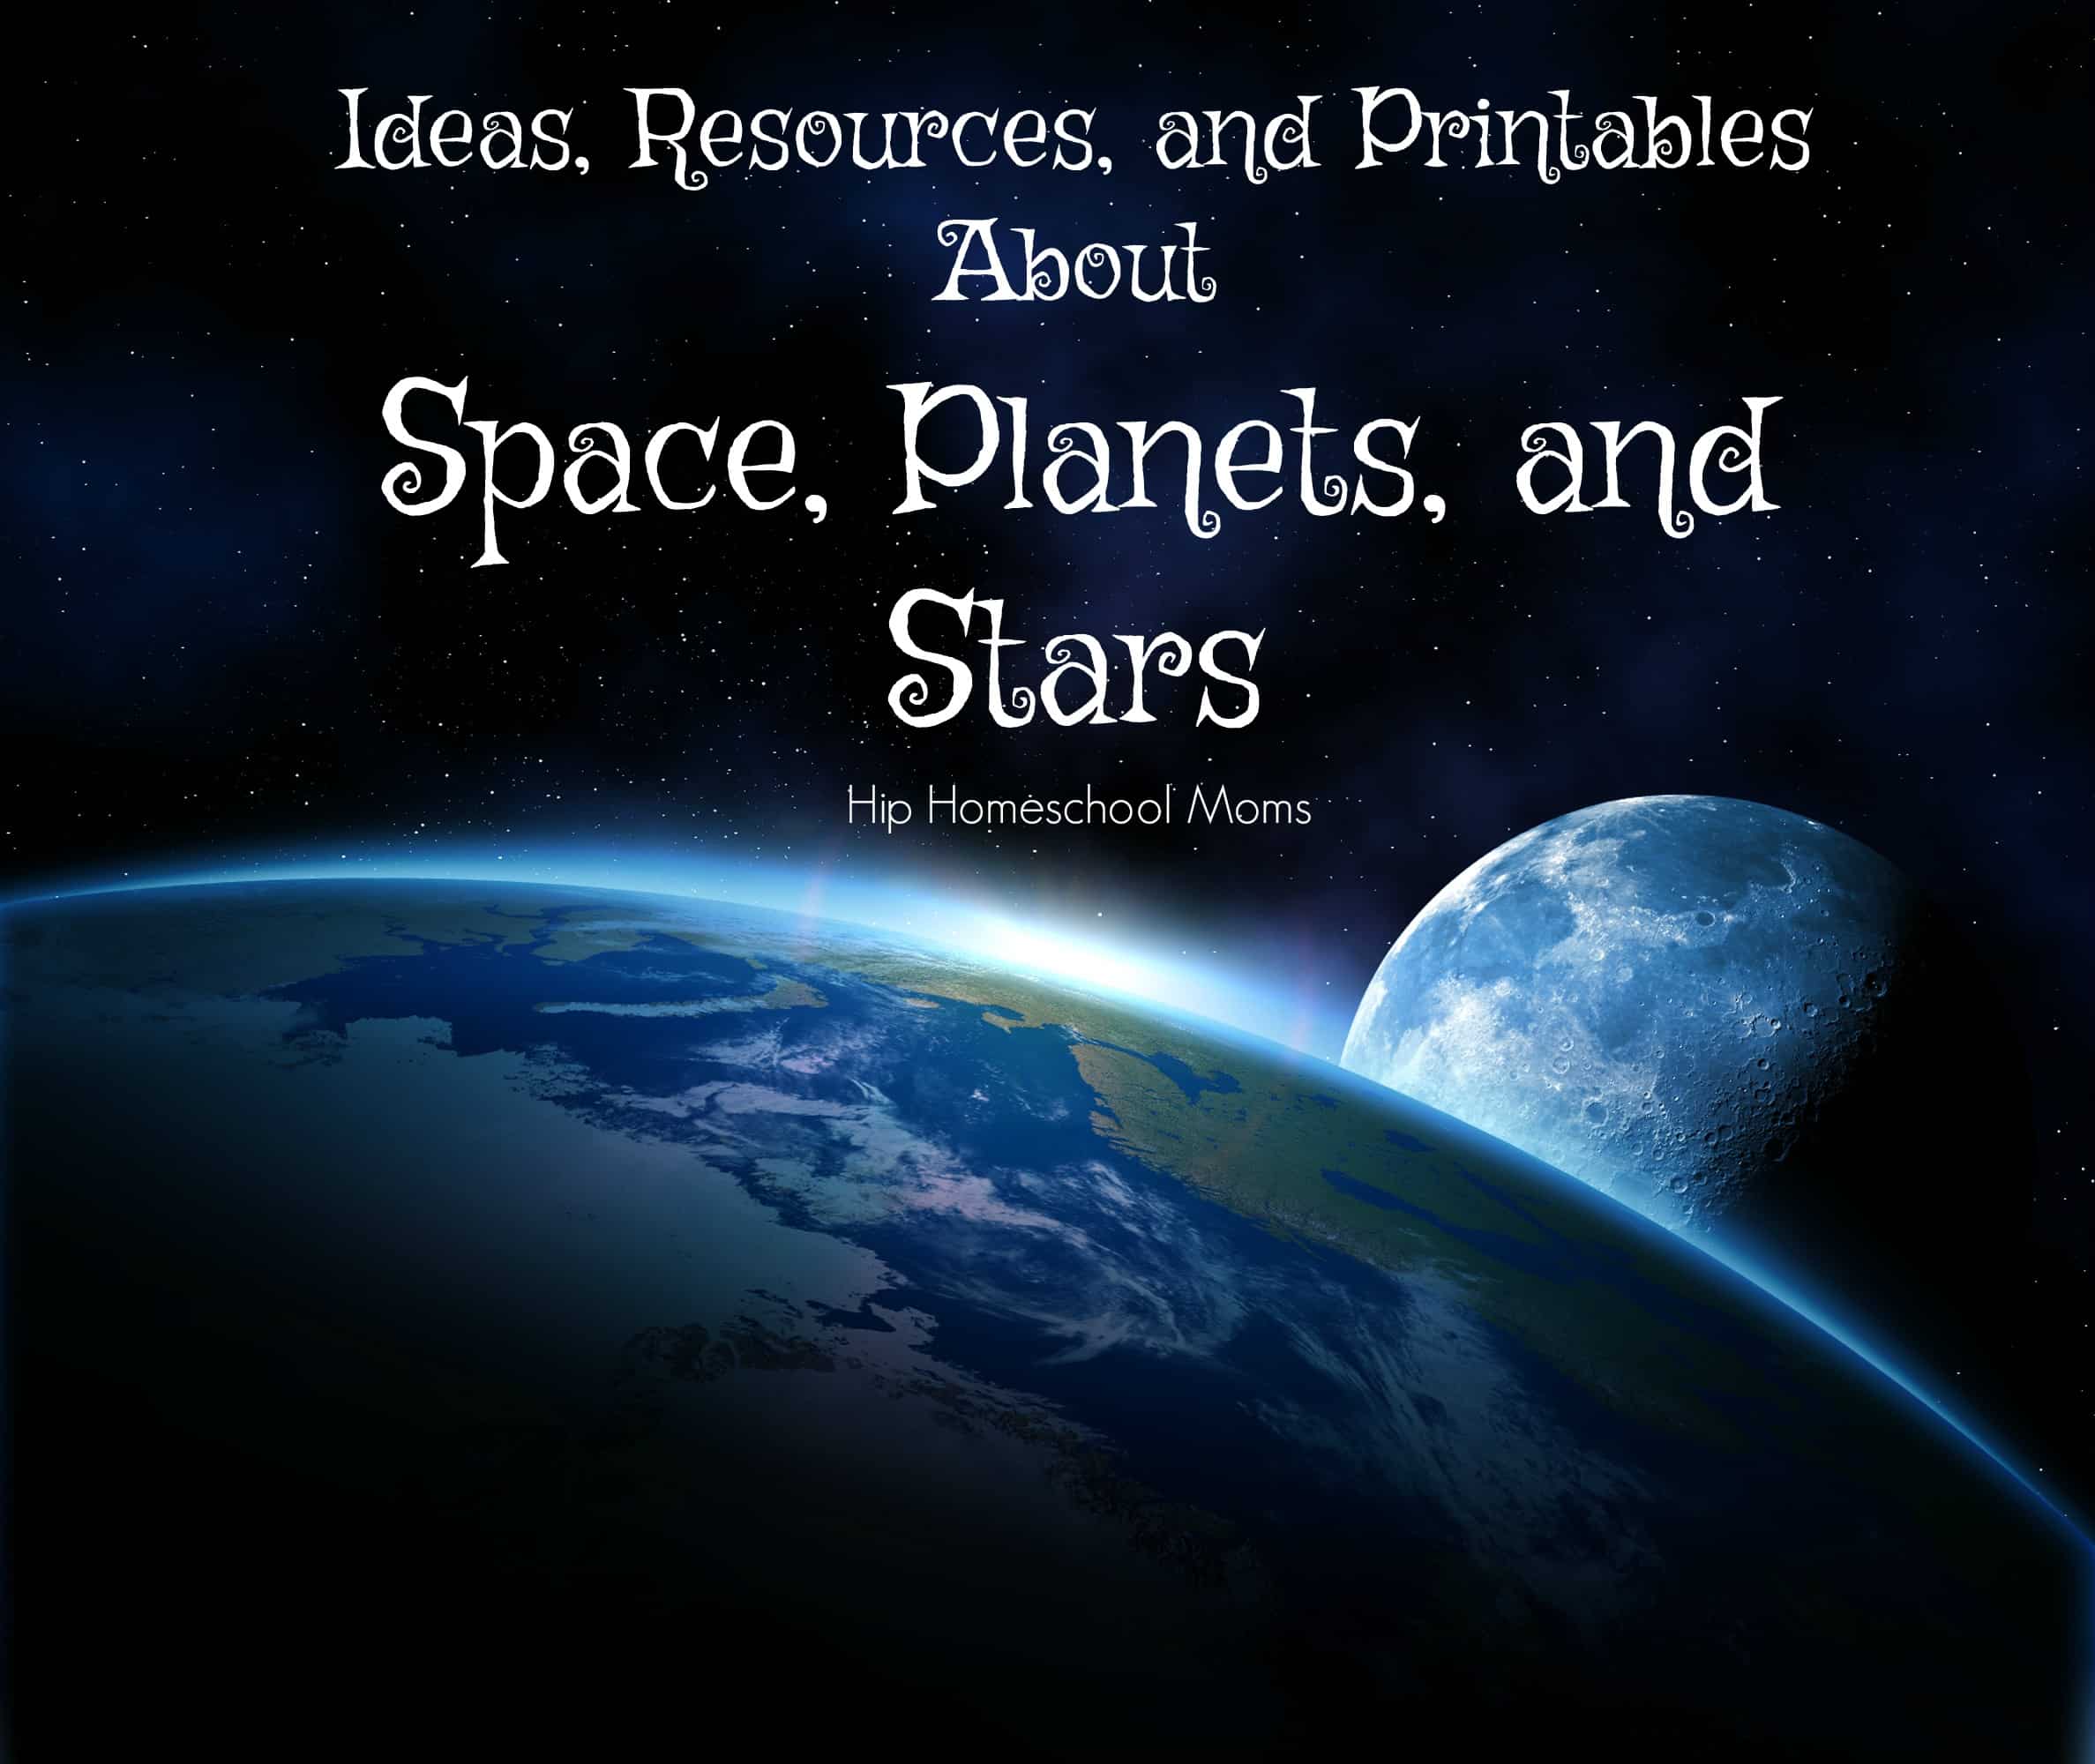 Ideas, Resources, and Printables About Space, Planets, and Stars |Hip Homeschool Moms